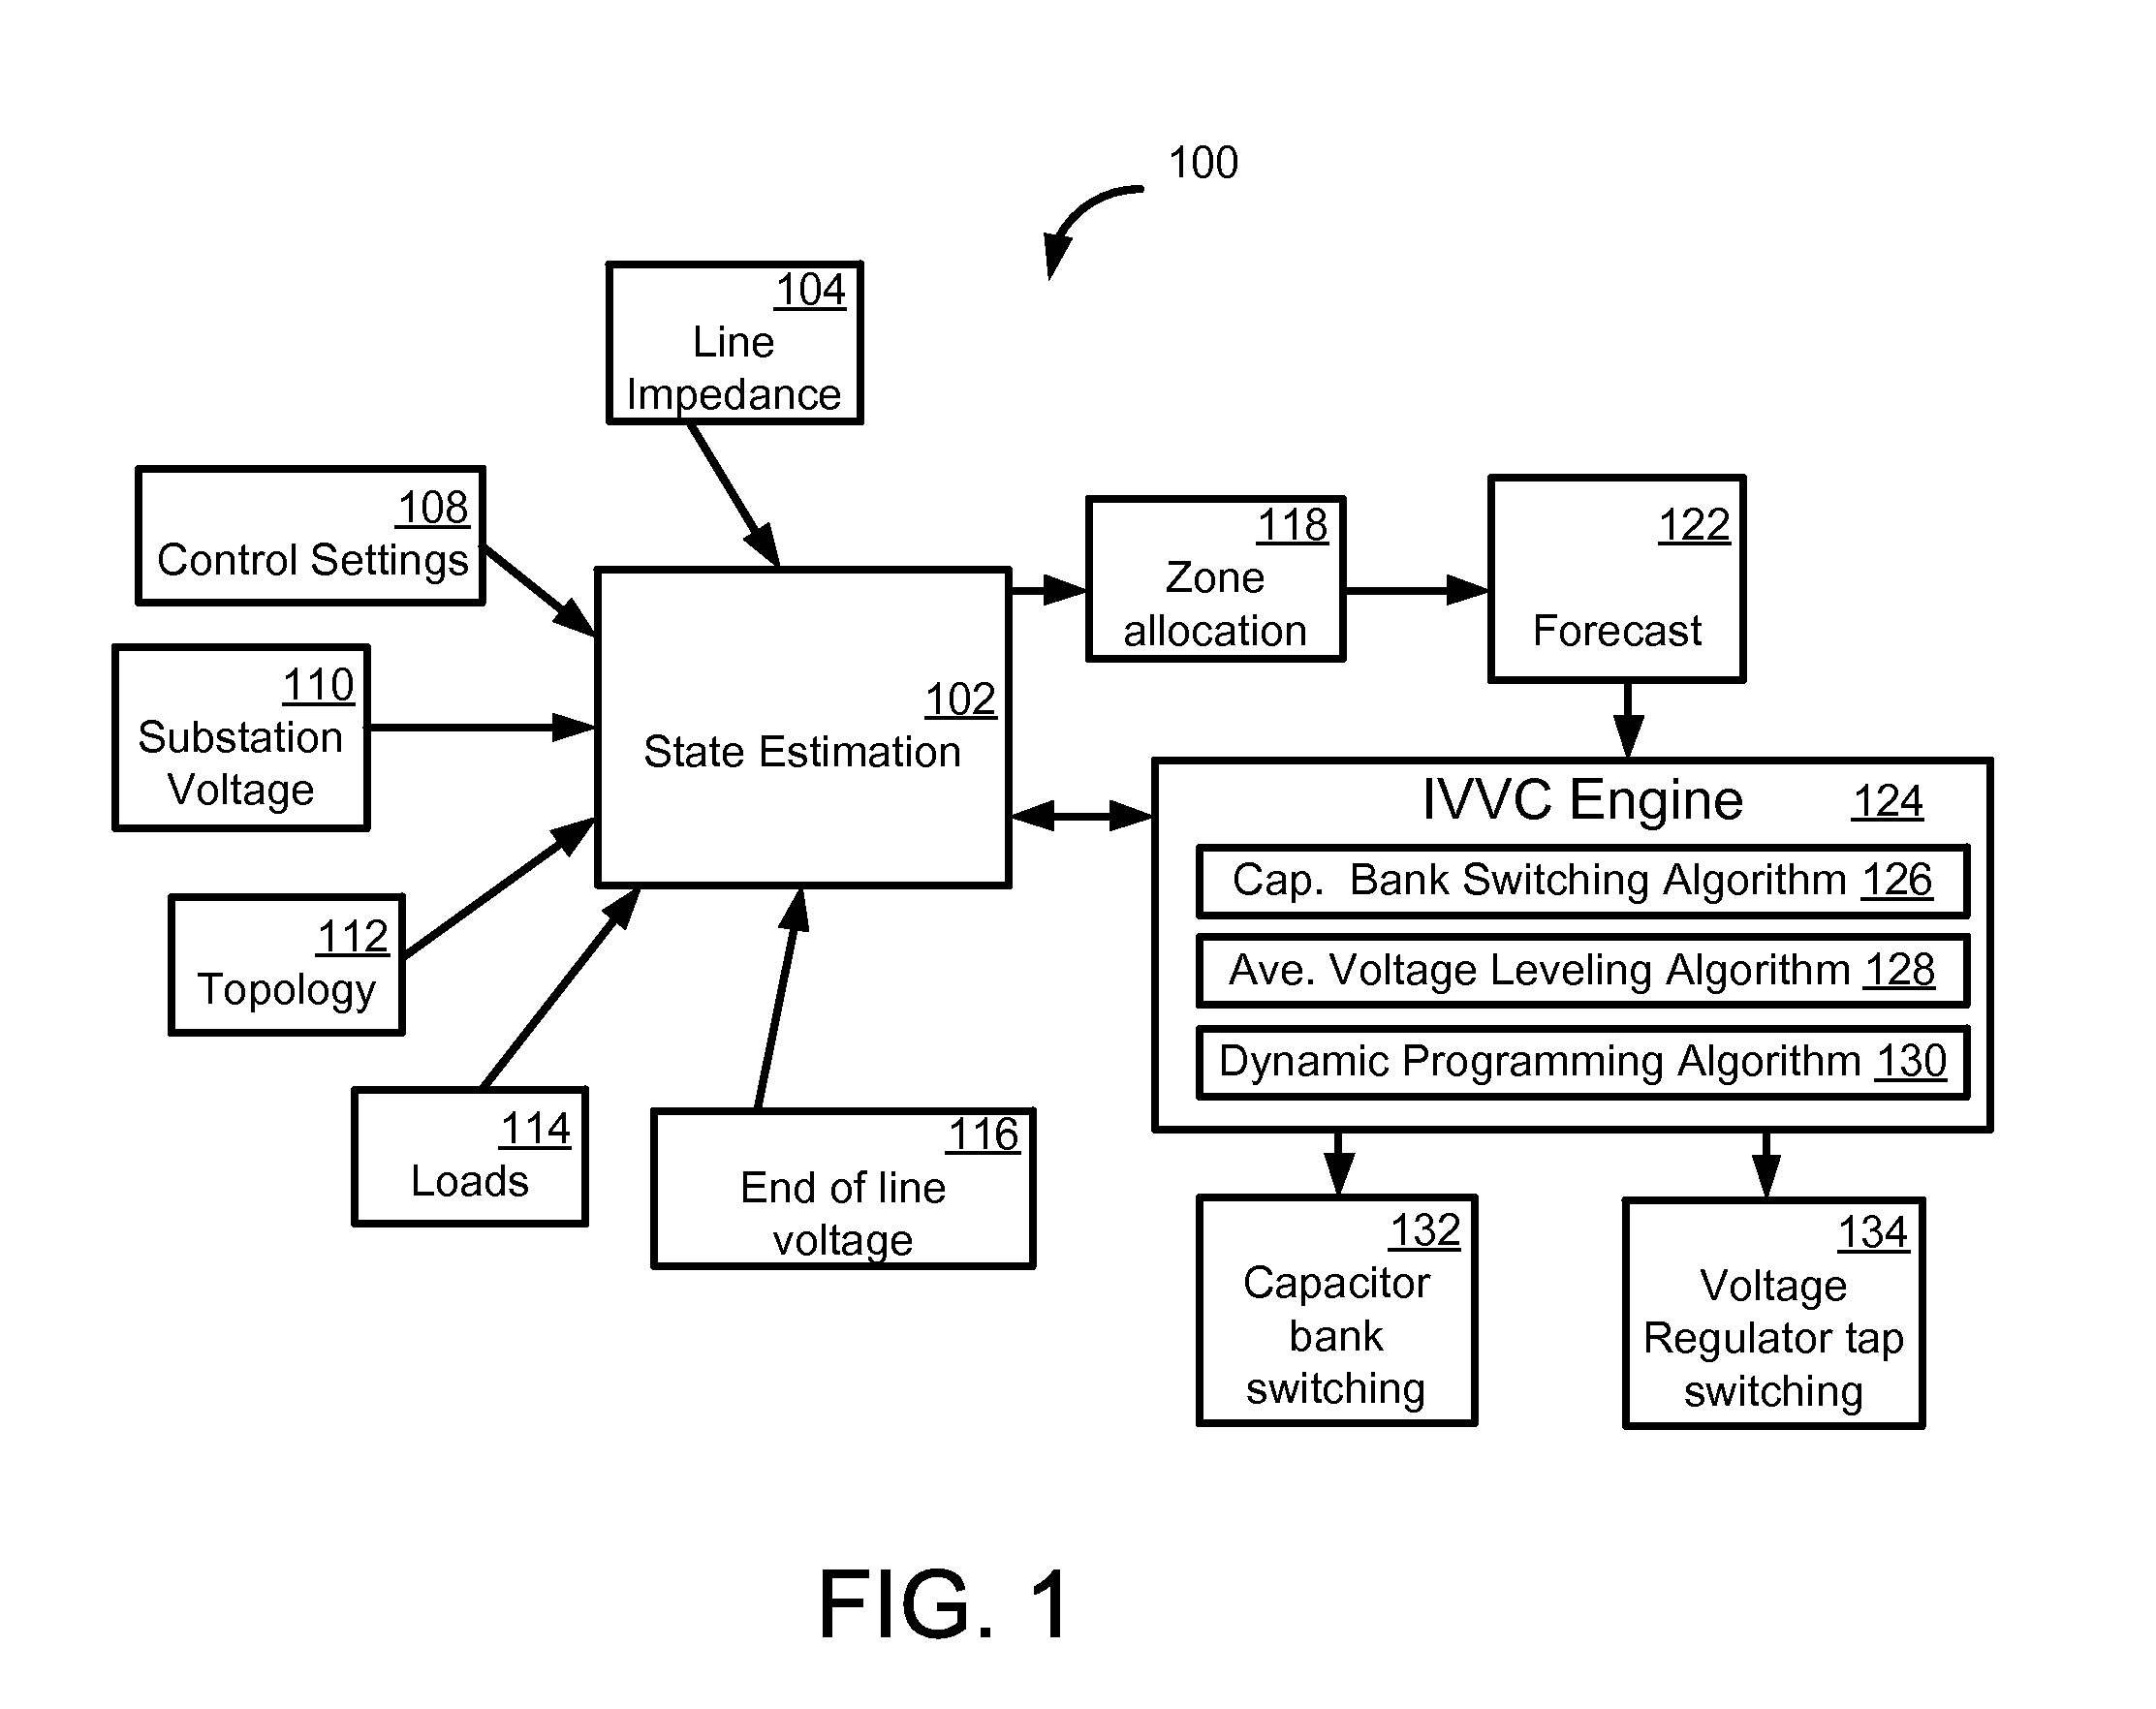 Systems, Methods, and Apparatus for Integrated Volt/VAR Control in Power Distribution Networks